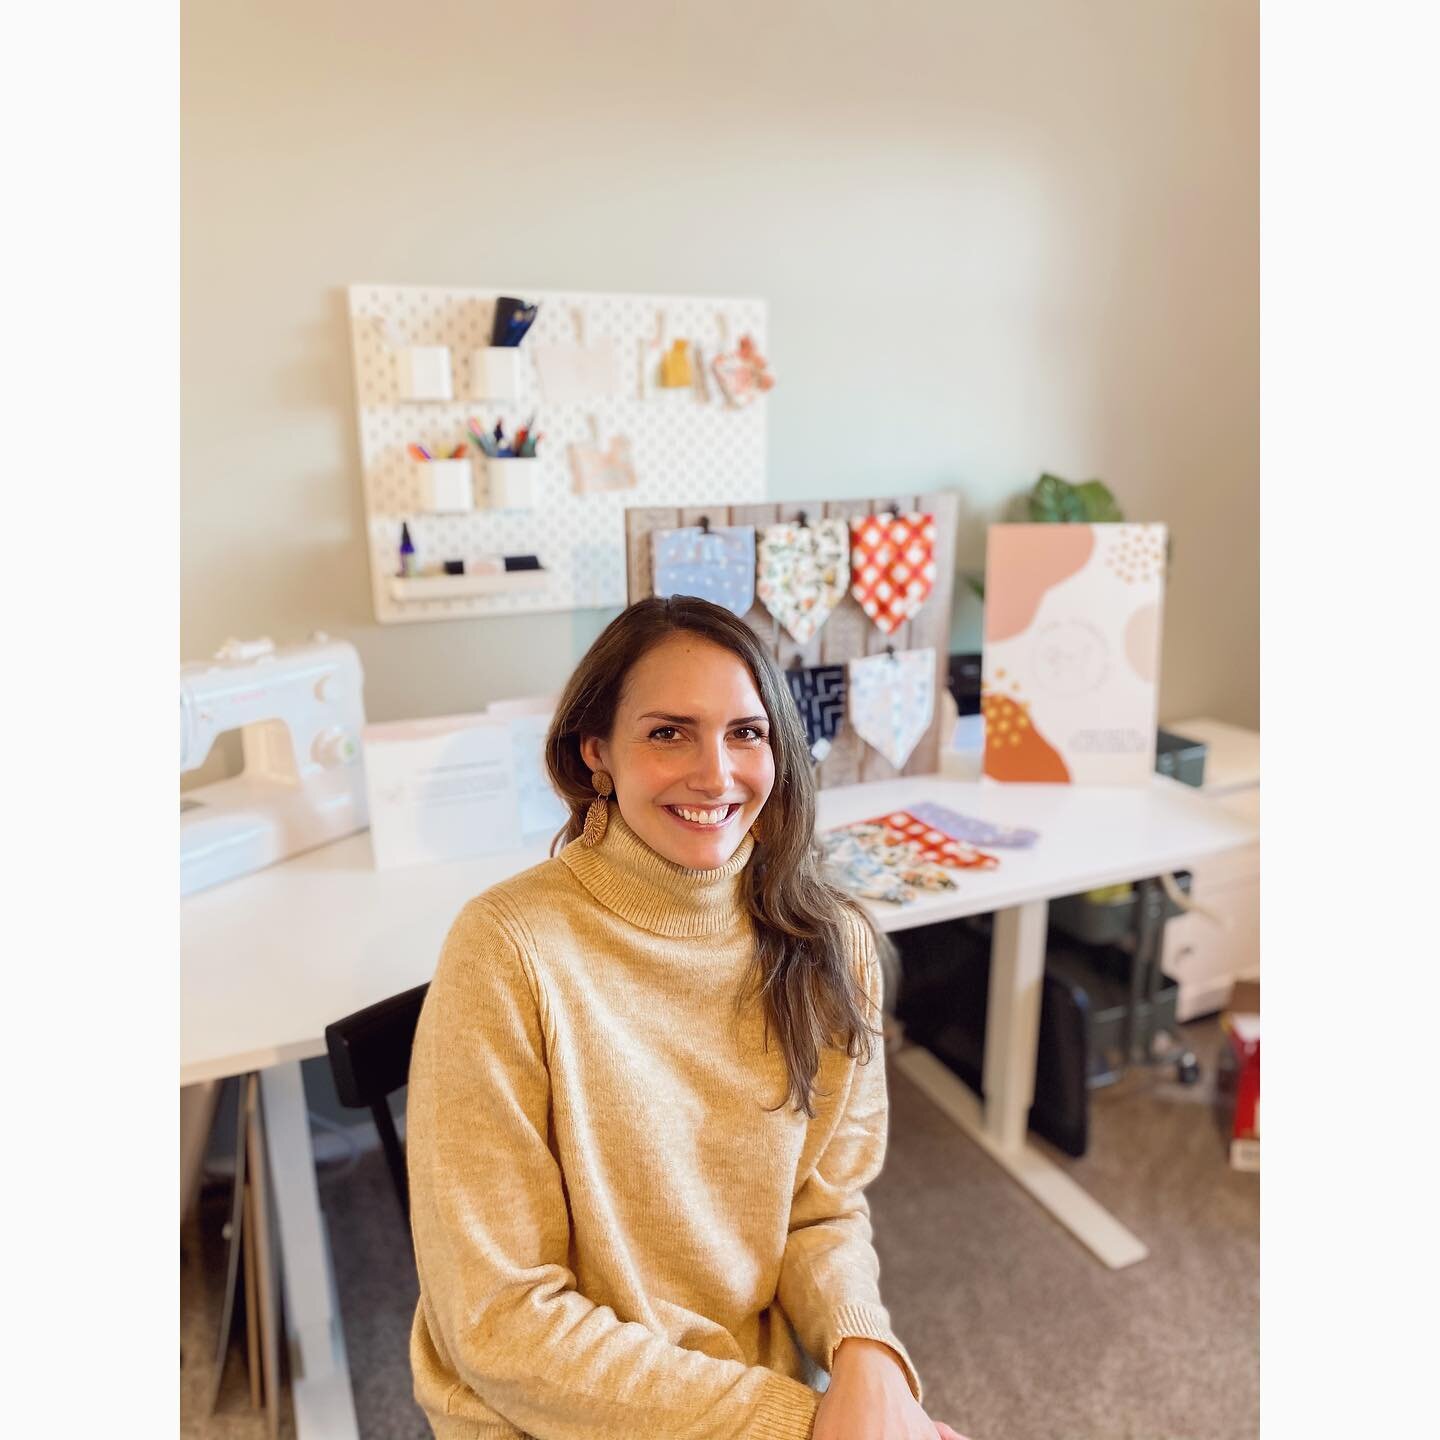 I have some big news to share! 🤭
☼
As members of The Sunday Dog family, I felt like I should keep you in the loop of what&rsquo;s going on behind the scenes in our little business! Can you guess the news?
☼
☼
I hired a seamstress!! I&rsquo;m SO exci